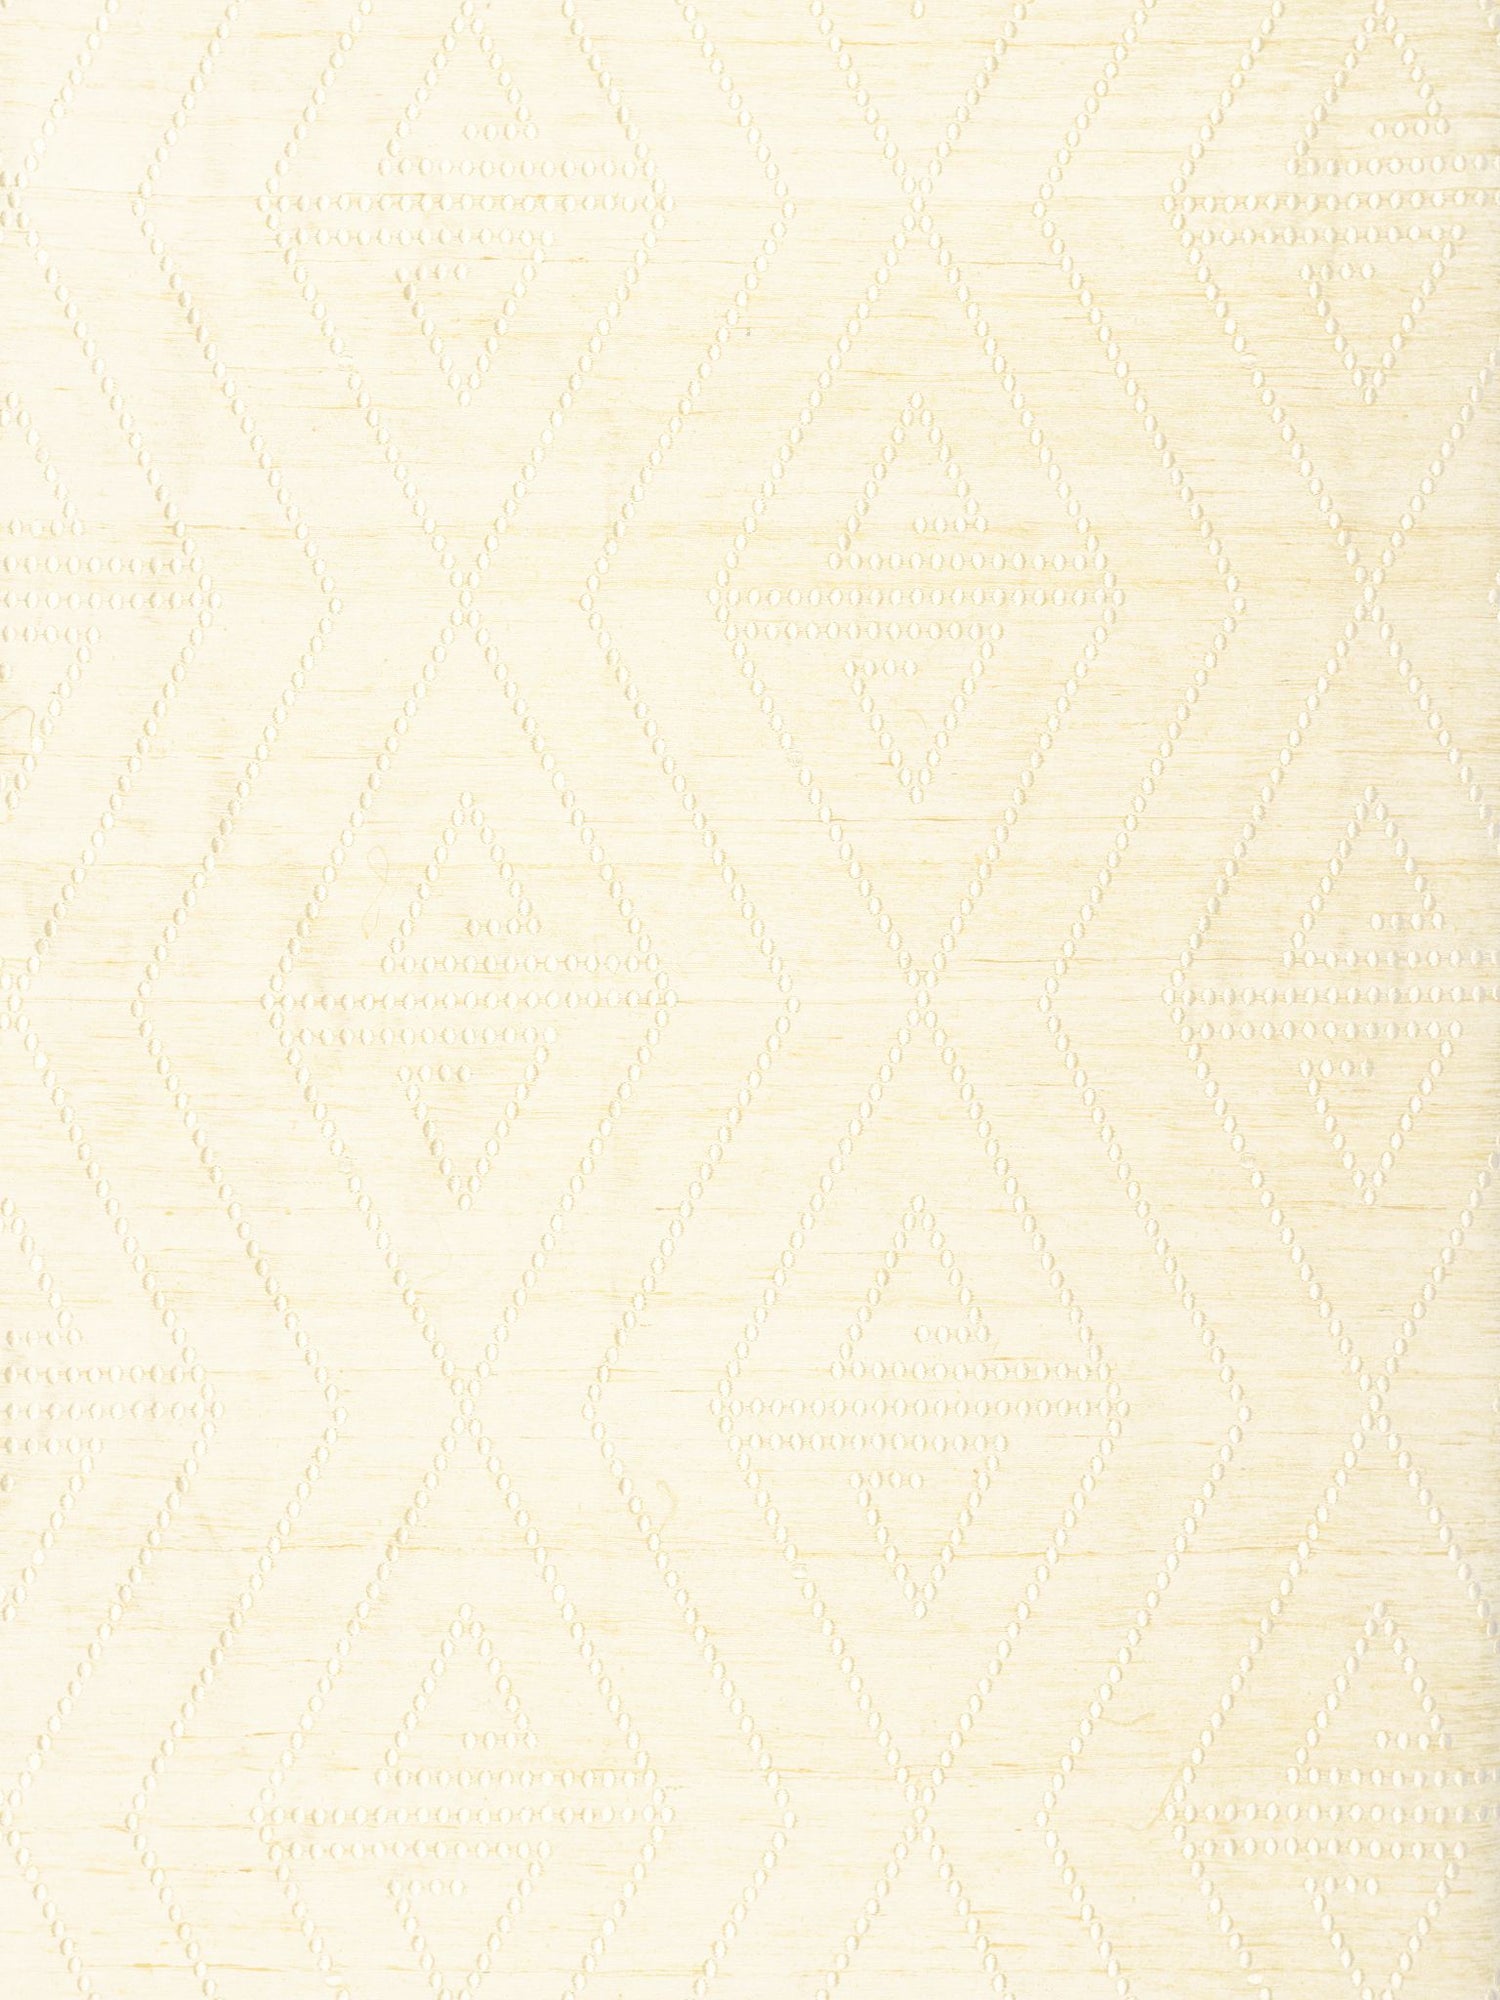 Torquay Coast fabric in cream color - pattern number ZS 00016873 - by Scalamandre in the Old World Weavers collection